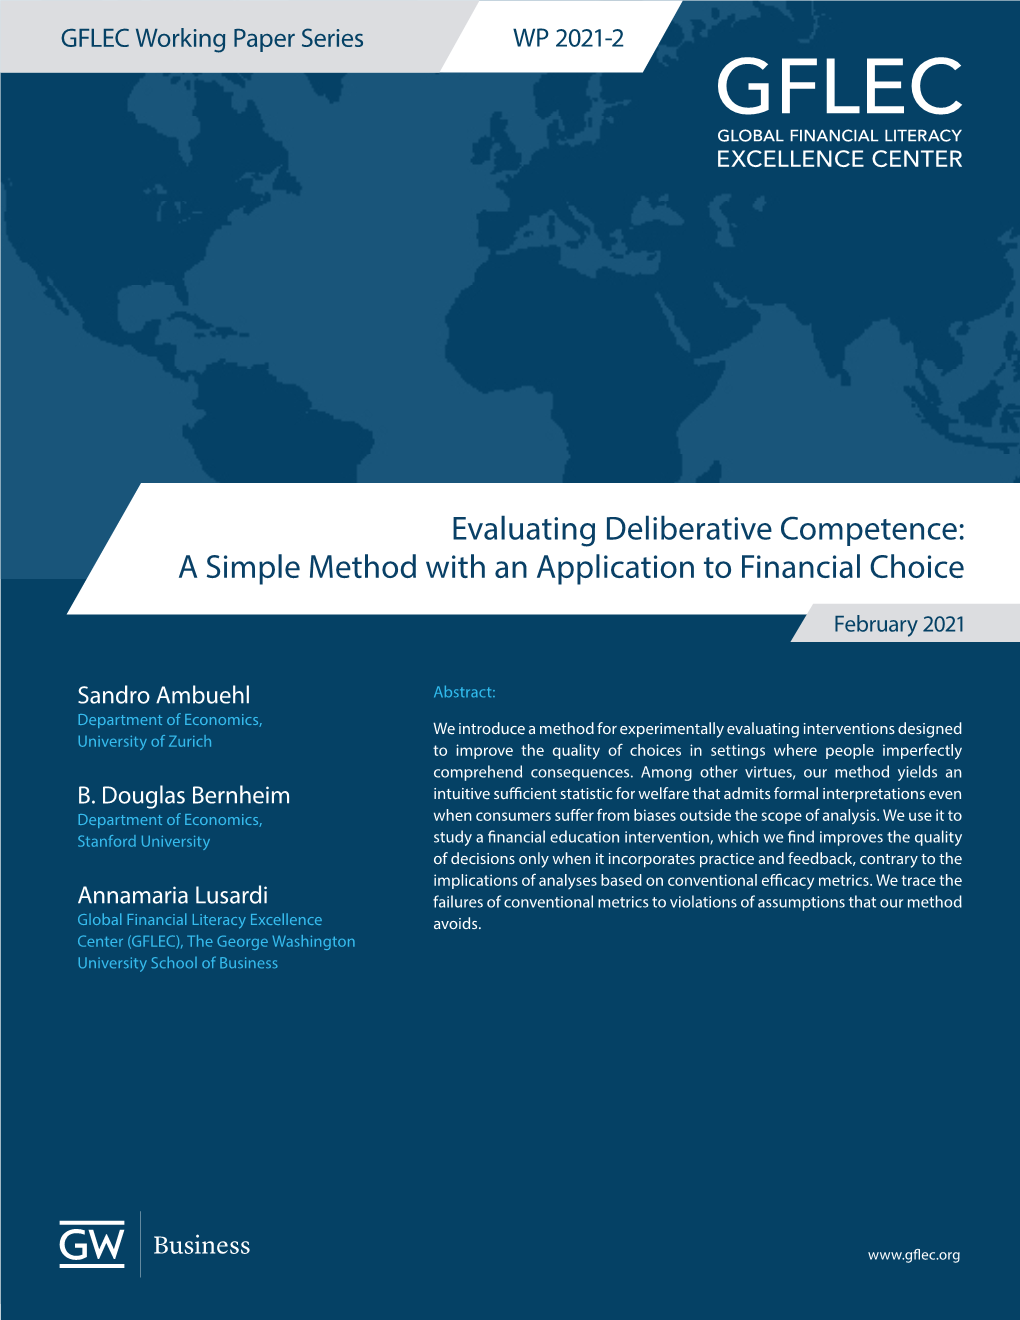 Evaluating Deliberative Competence: a Simple Method with an Application to Financial Choice